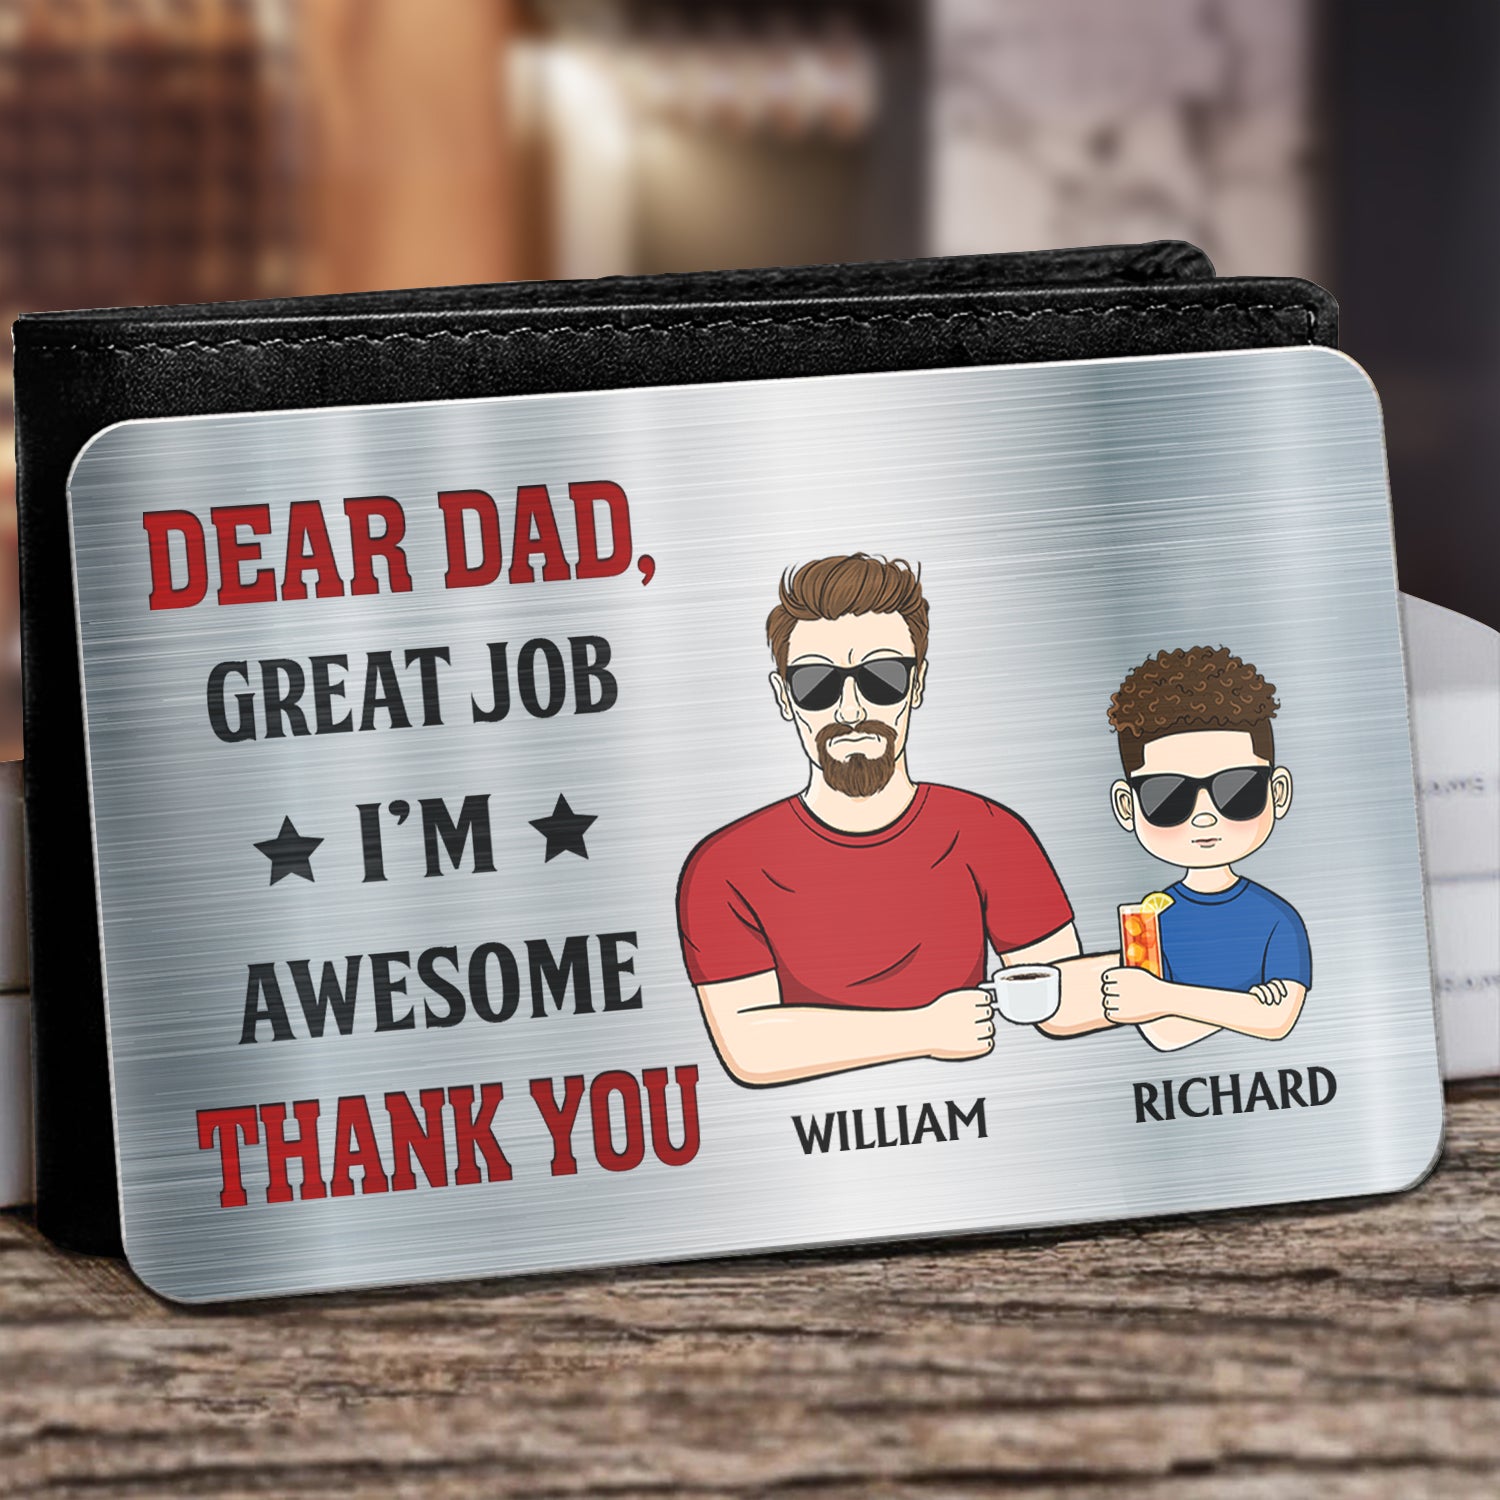 Great Job We're Awesome Kids - Gift For Dad, Father, Grandpa - Personalized Aluminum Wallet Card